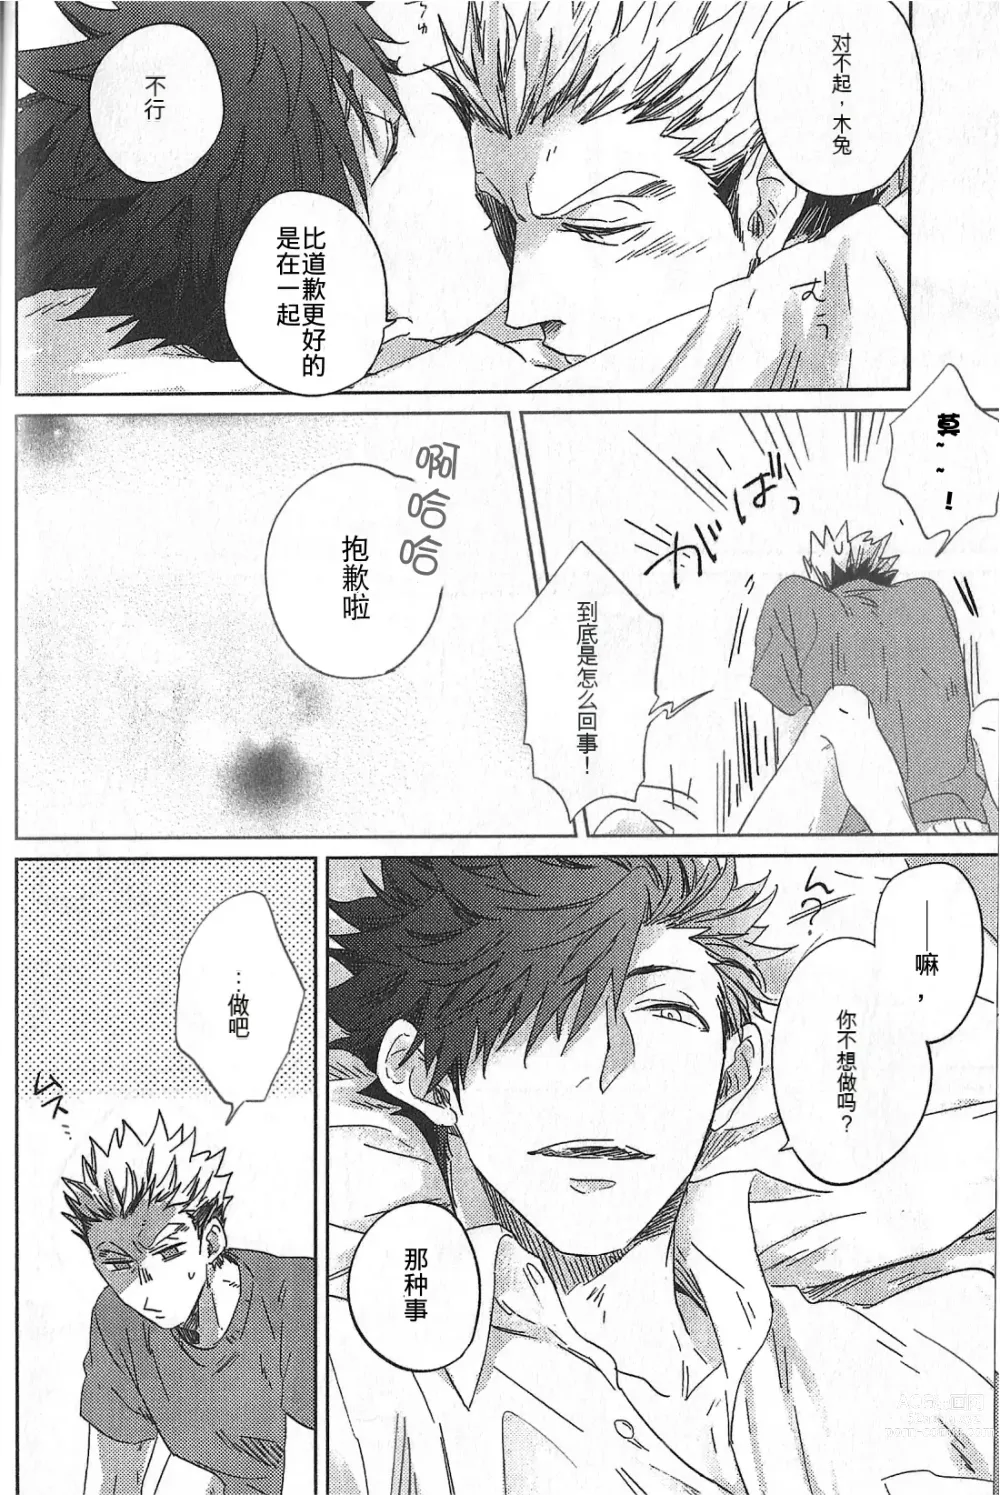 Page 13 of doujinshi 极境的野兽 前篇